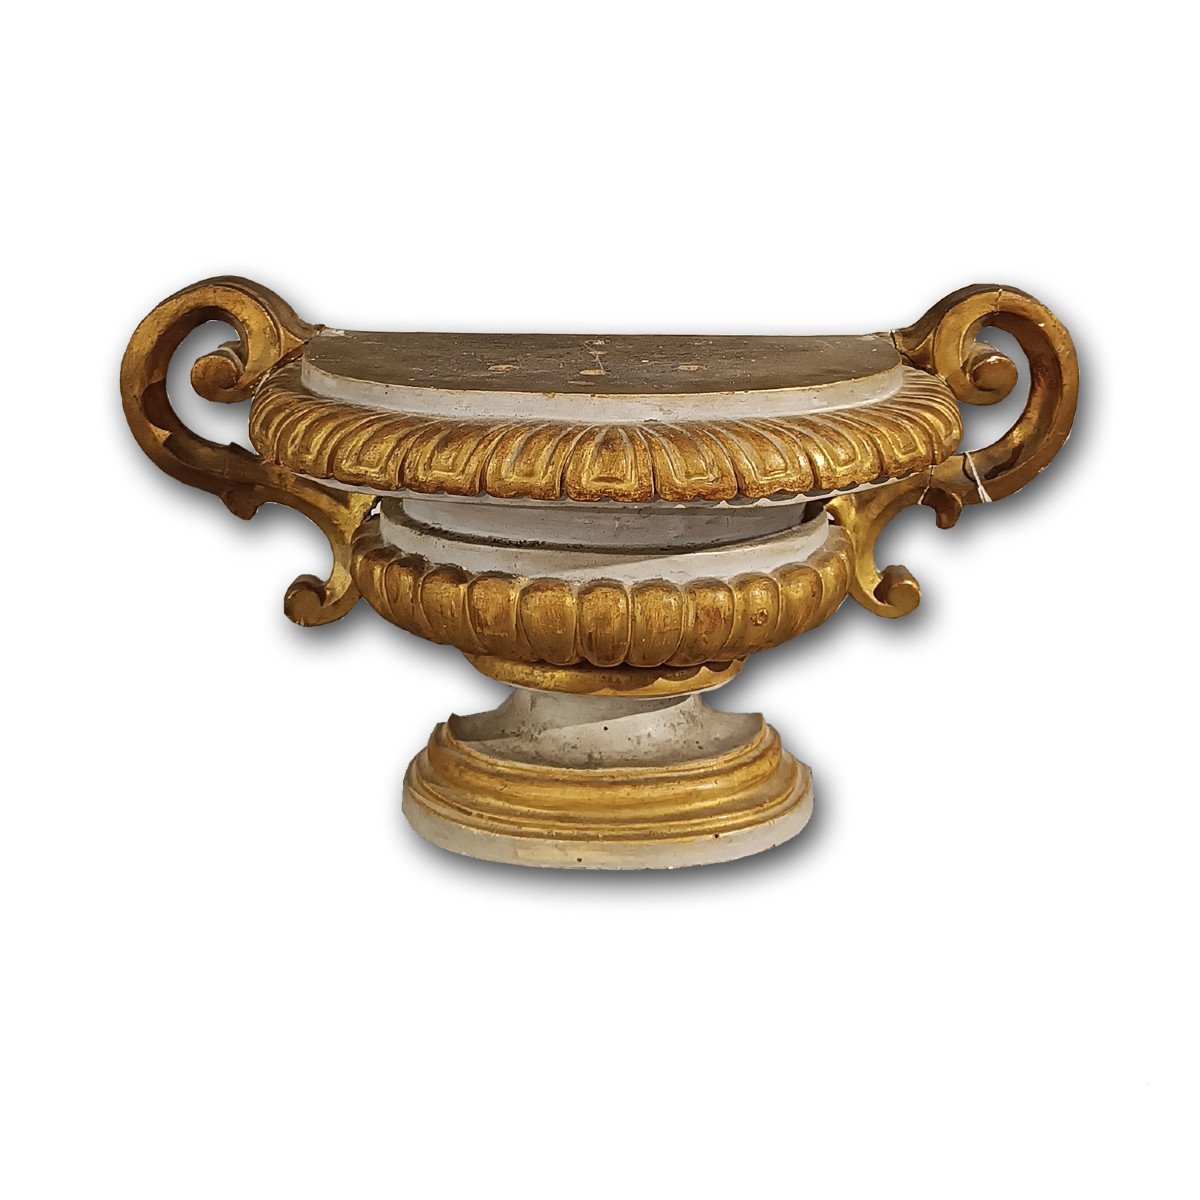 End Of The 18th Century Neoclassic Palm Holder Vase